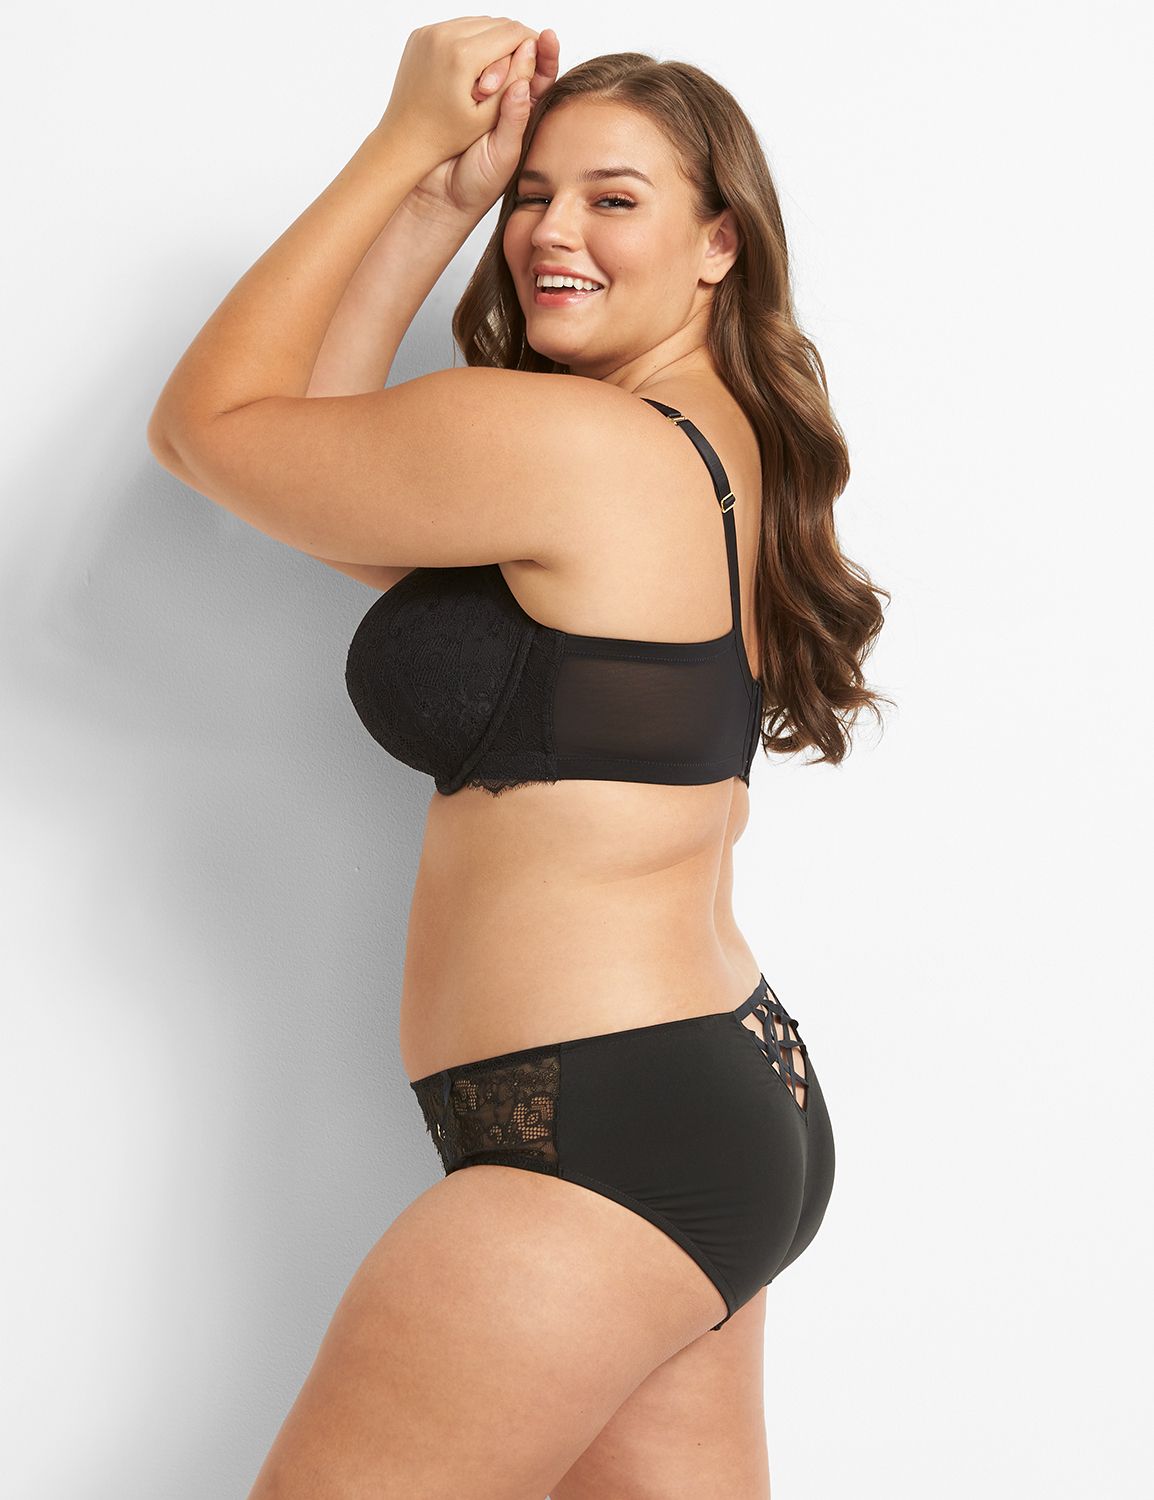 LANE BRYANT Cacique Nude with Off-White Lace Overlay 😜Balconette Bra 44G